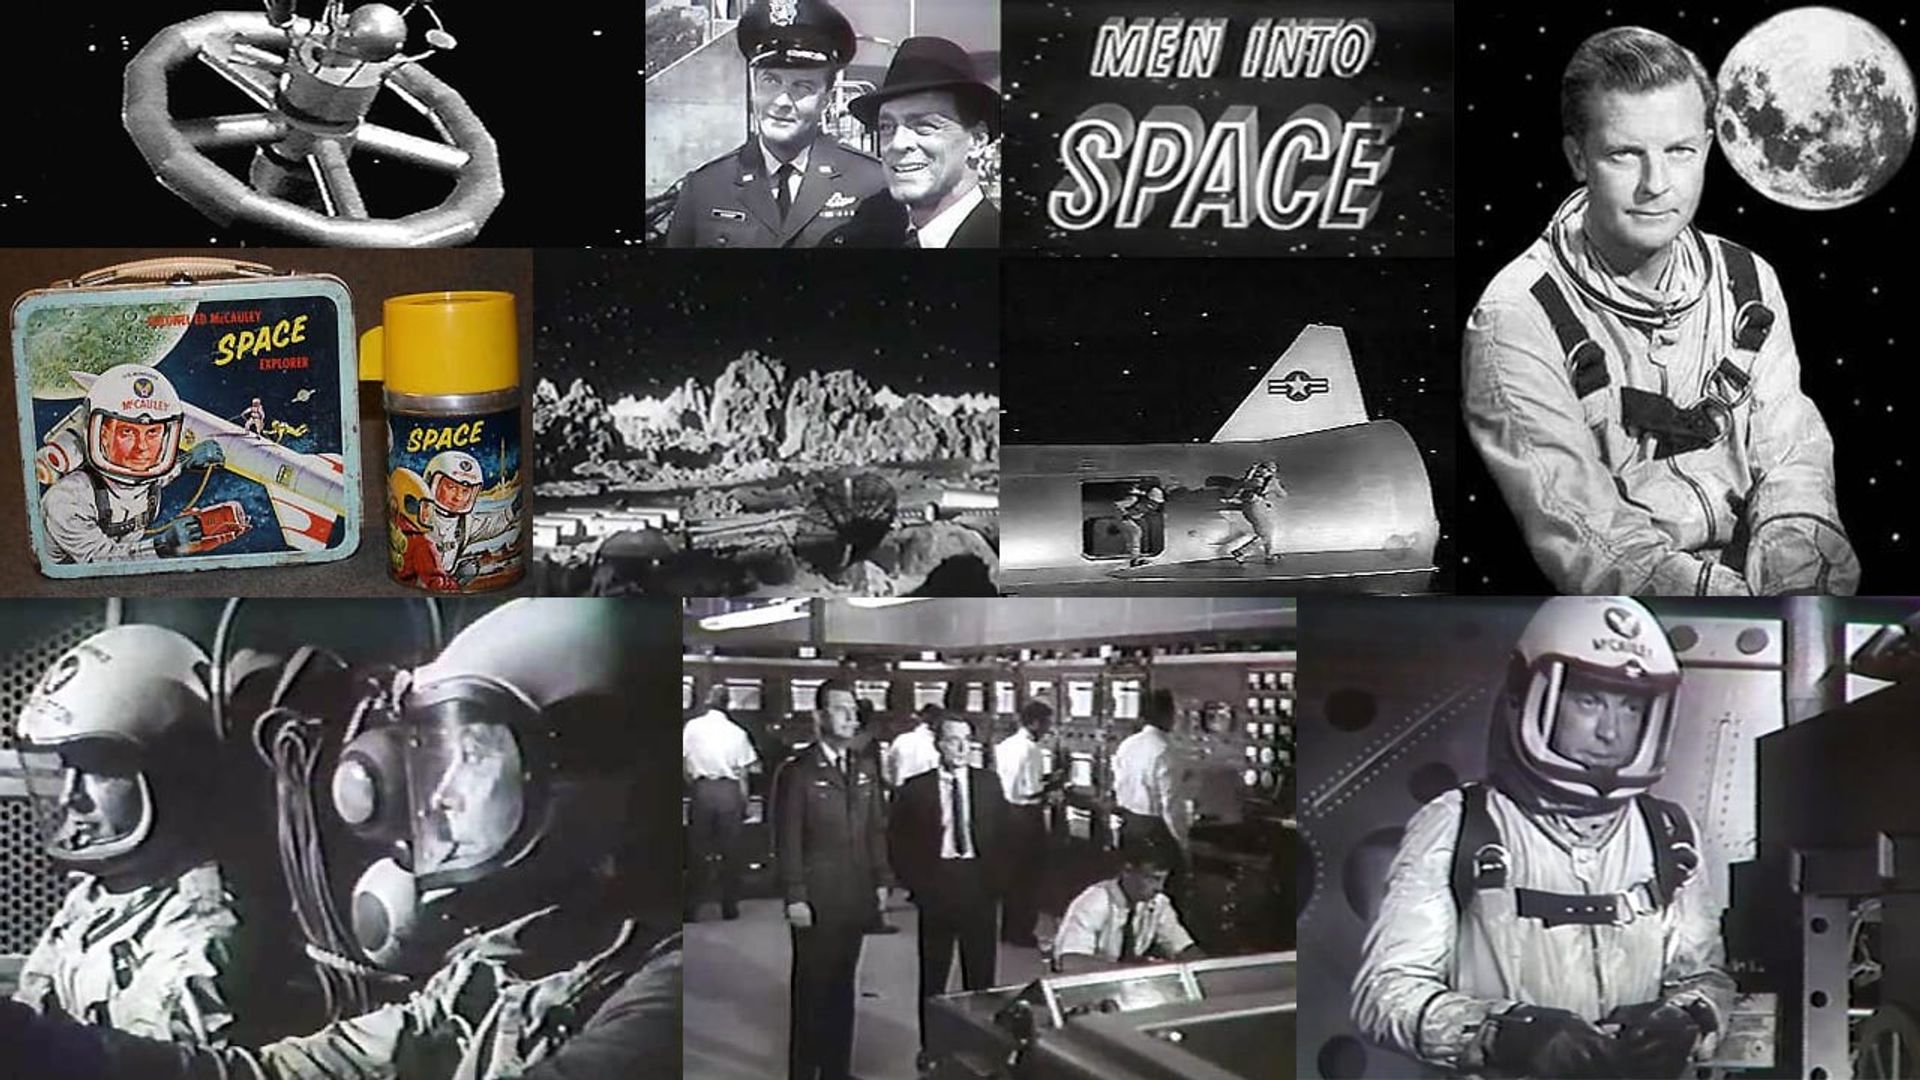 Men Into Space background